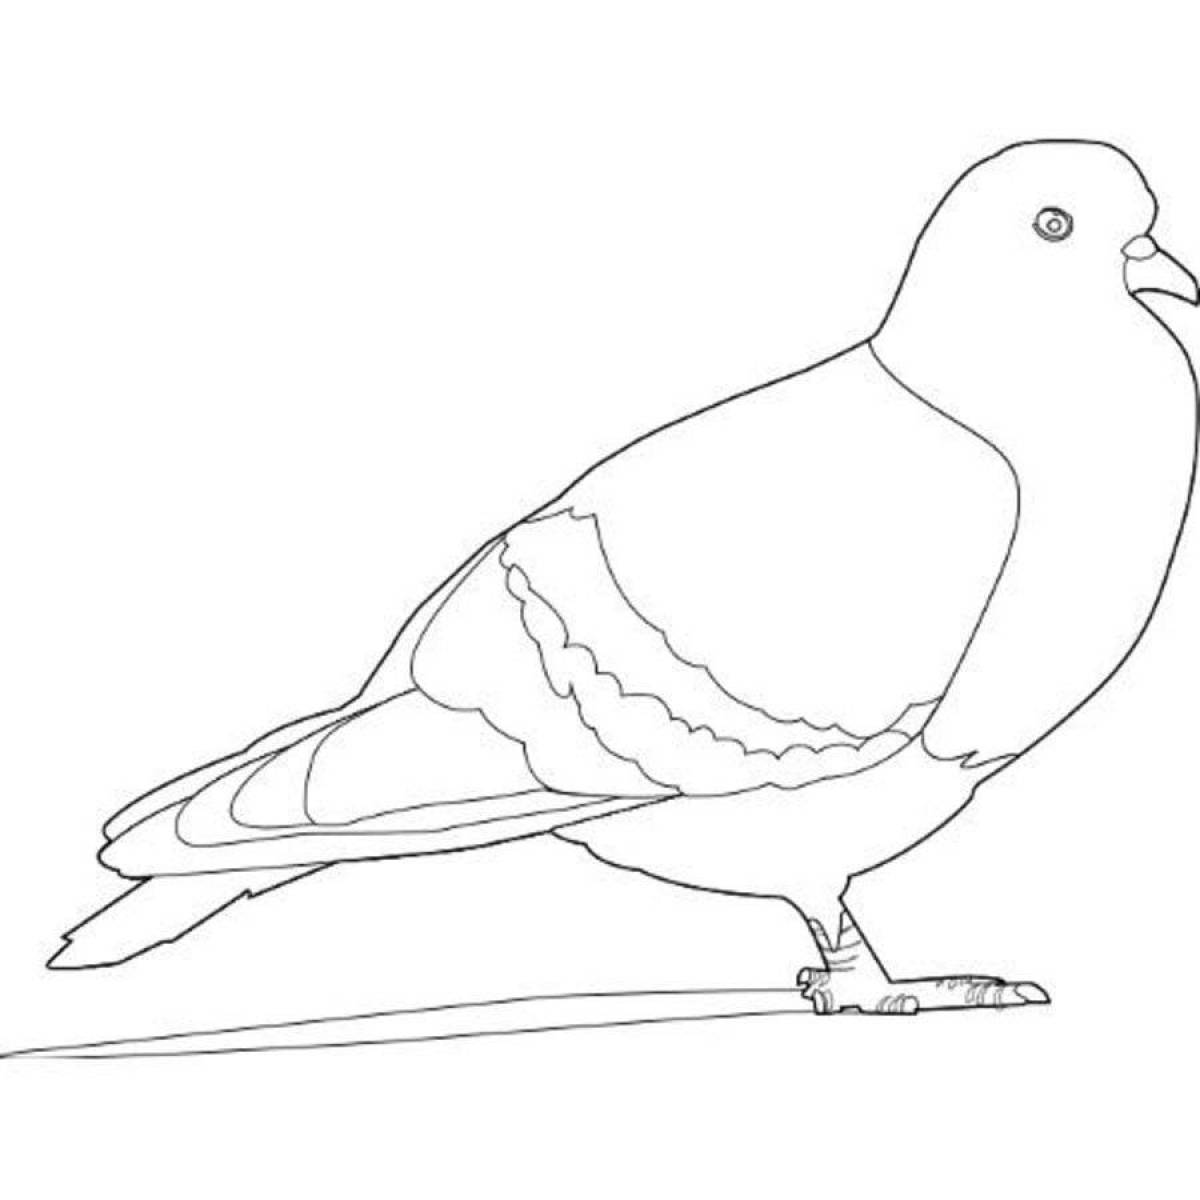 Exquisite dove coloring book for kids